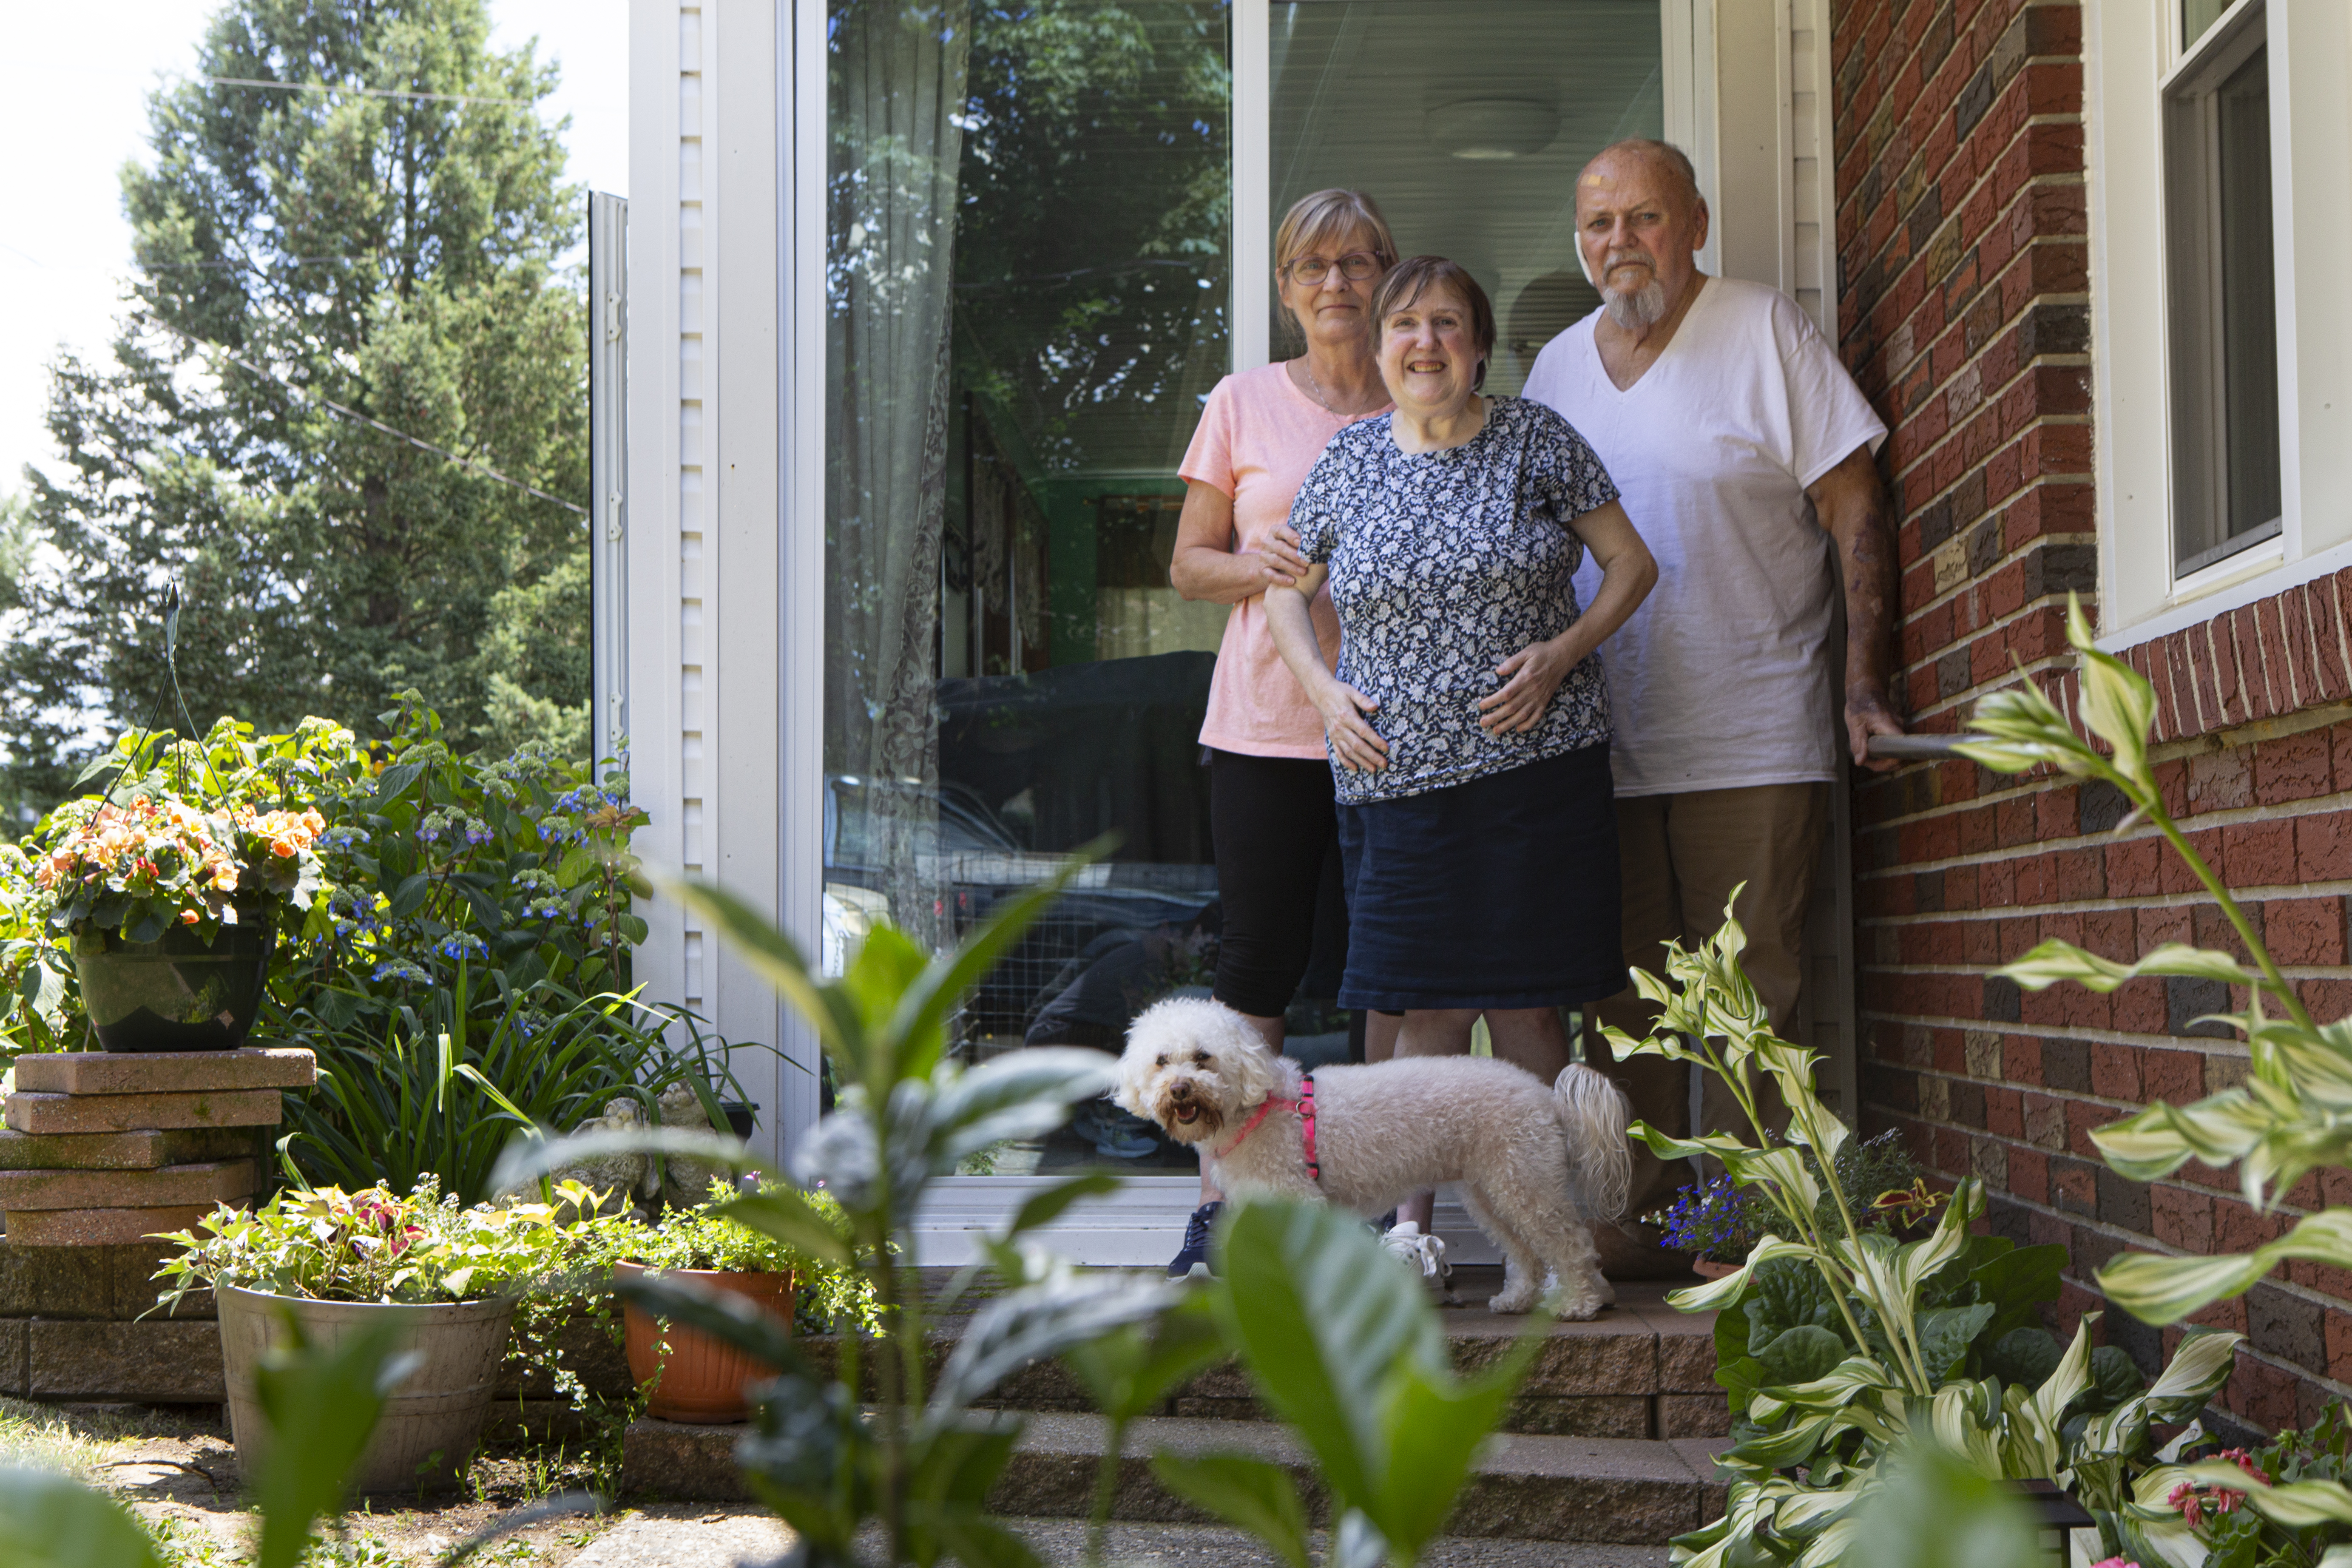 Three people and a dog standing on a porch in front of their brick house.